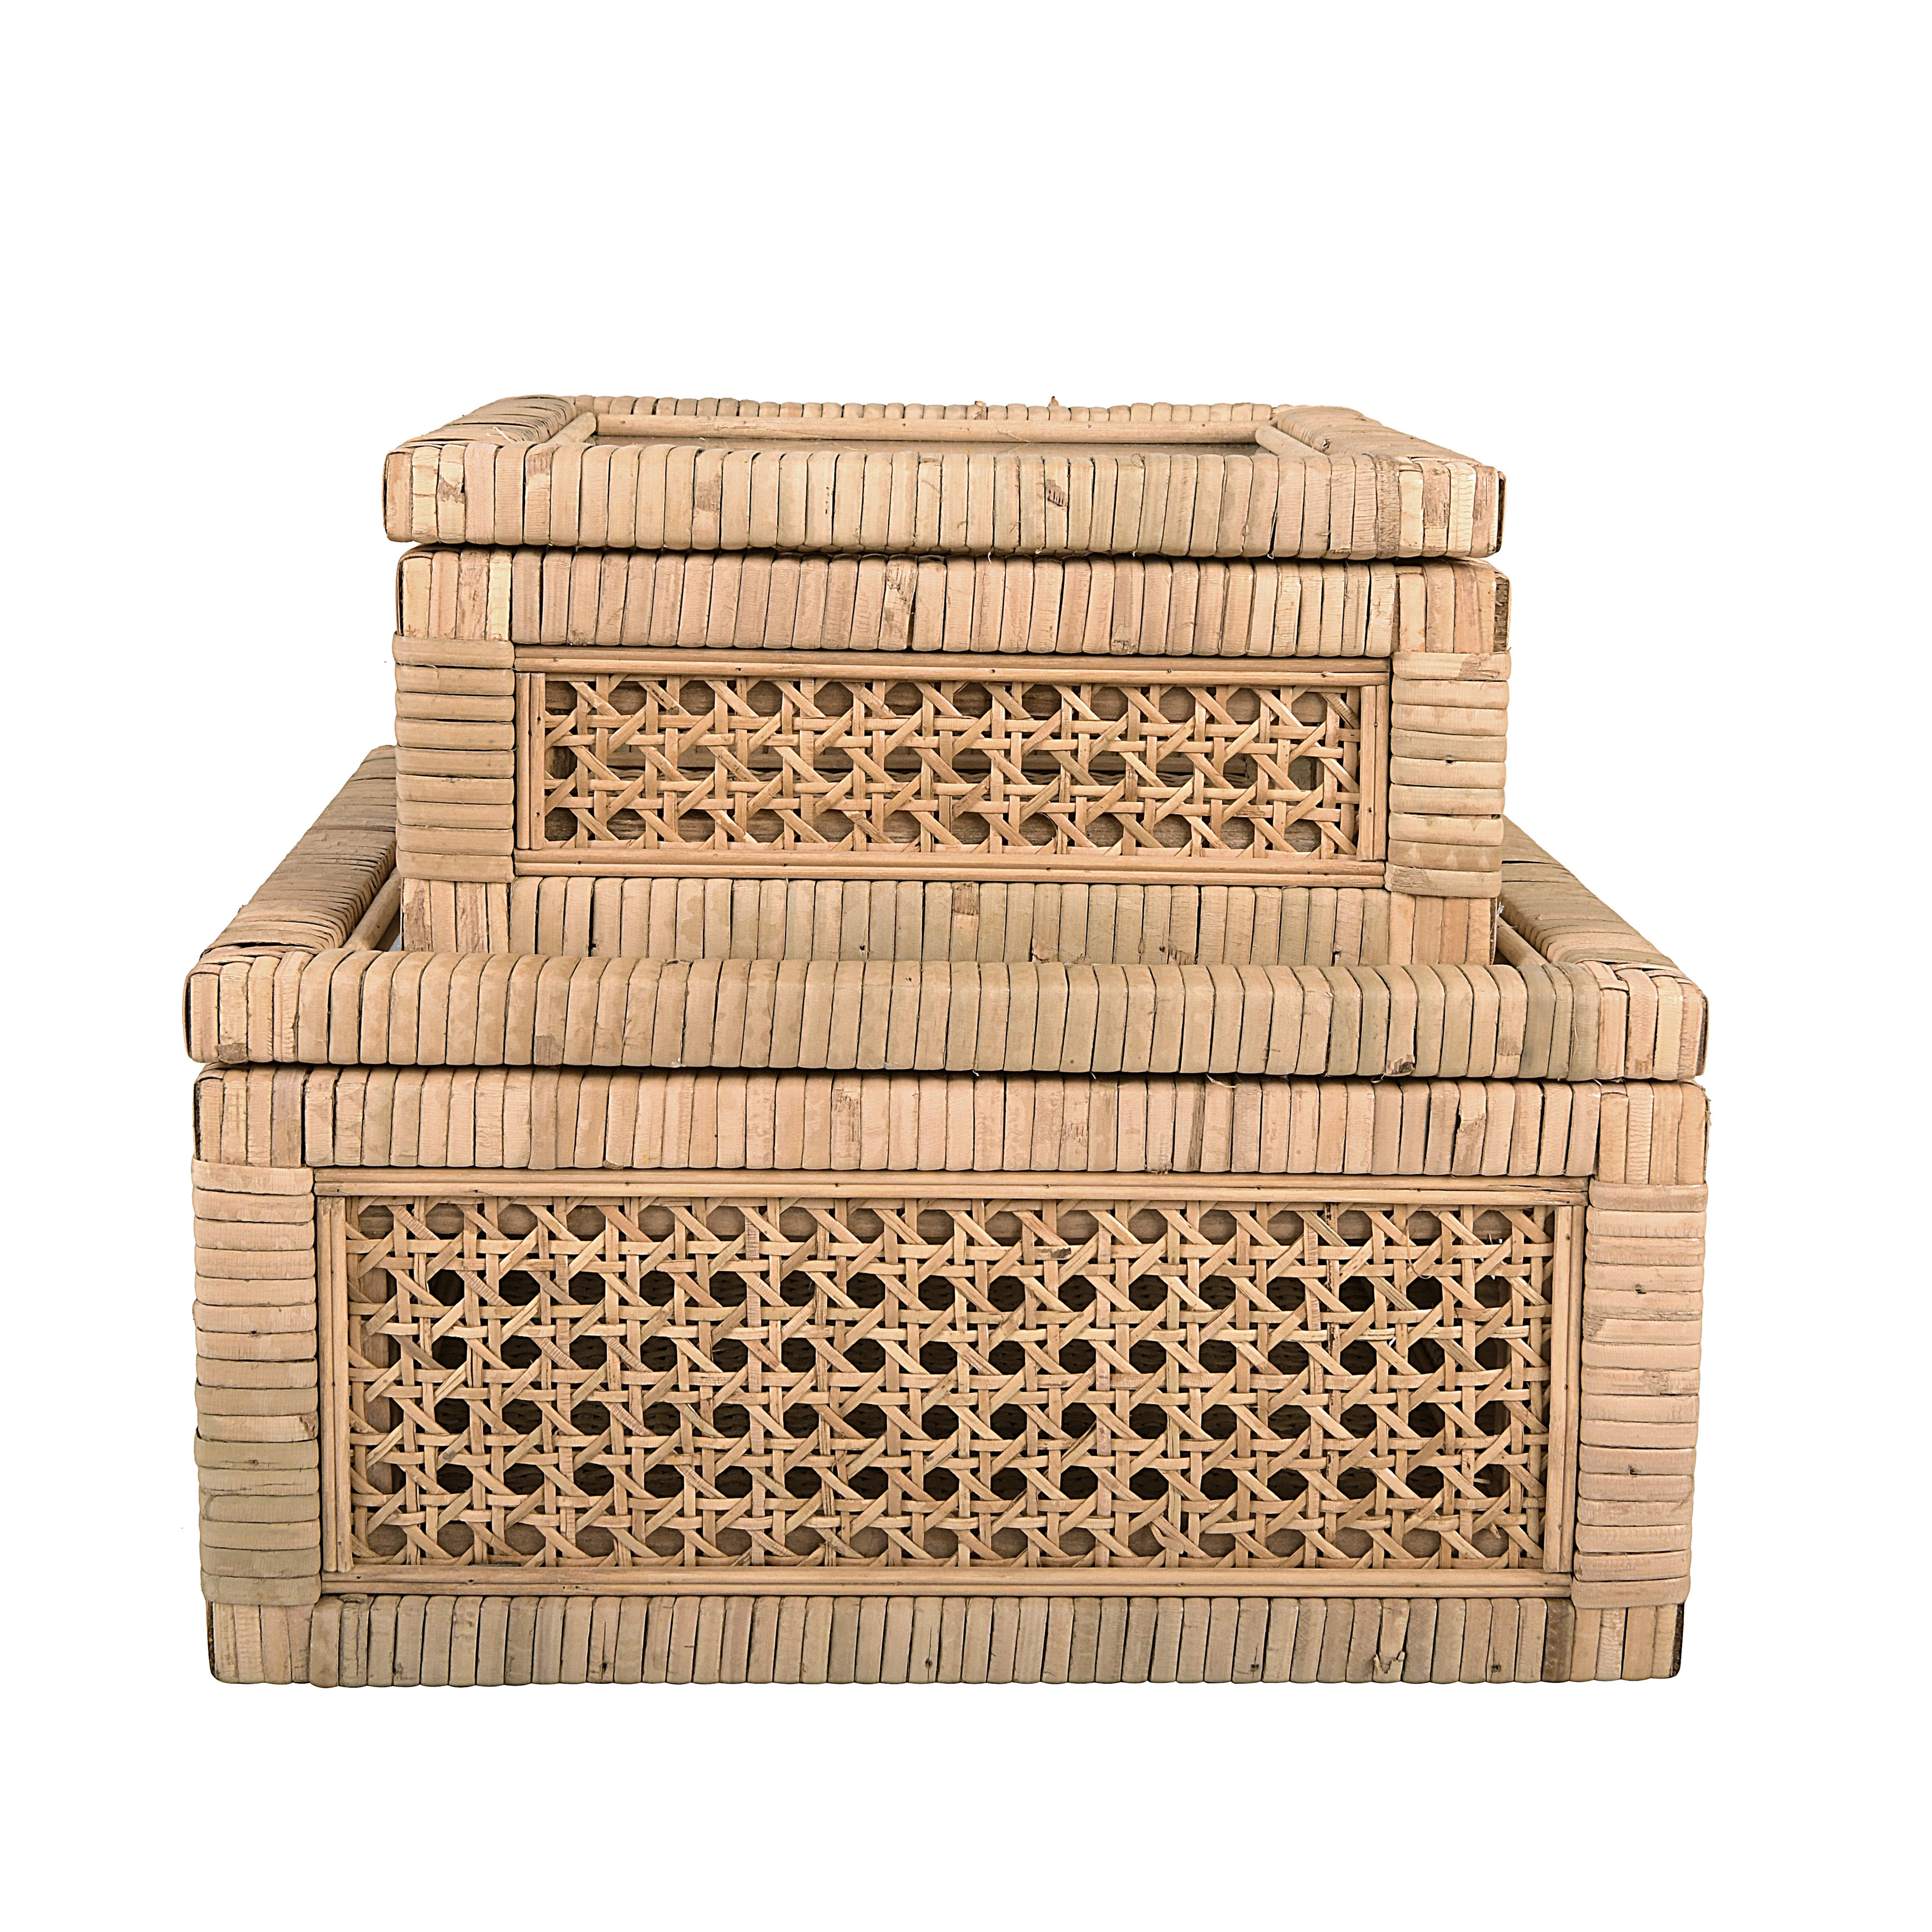 Cane and Rattan Display Boxes with Glass Lid, Set of 2 - Nomad Home